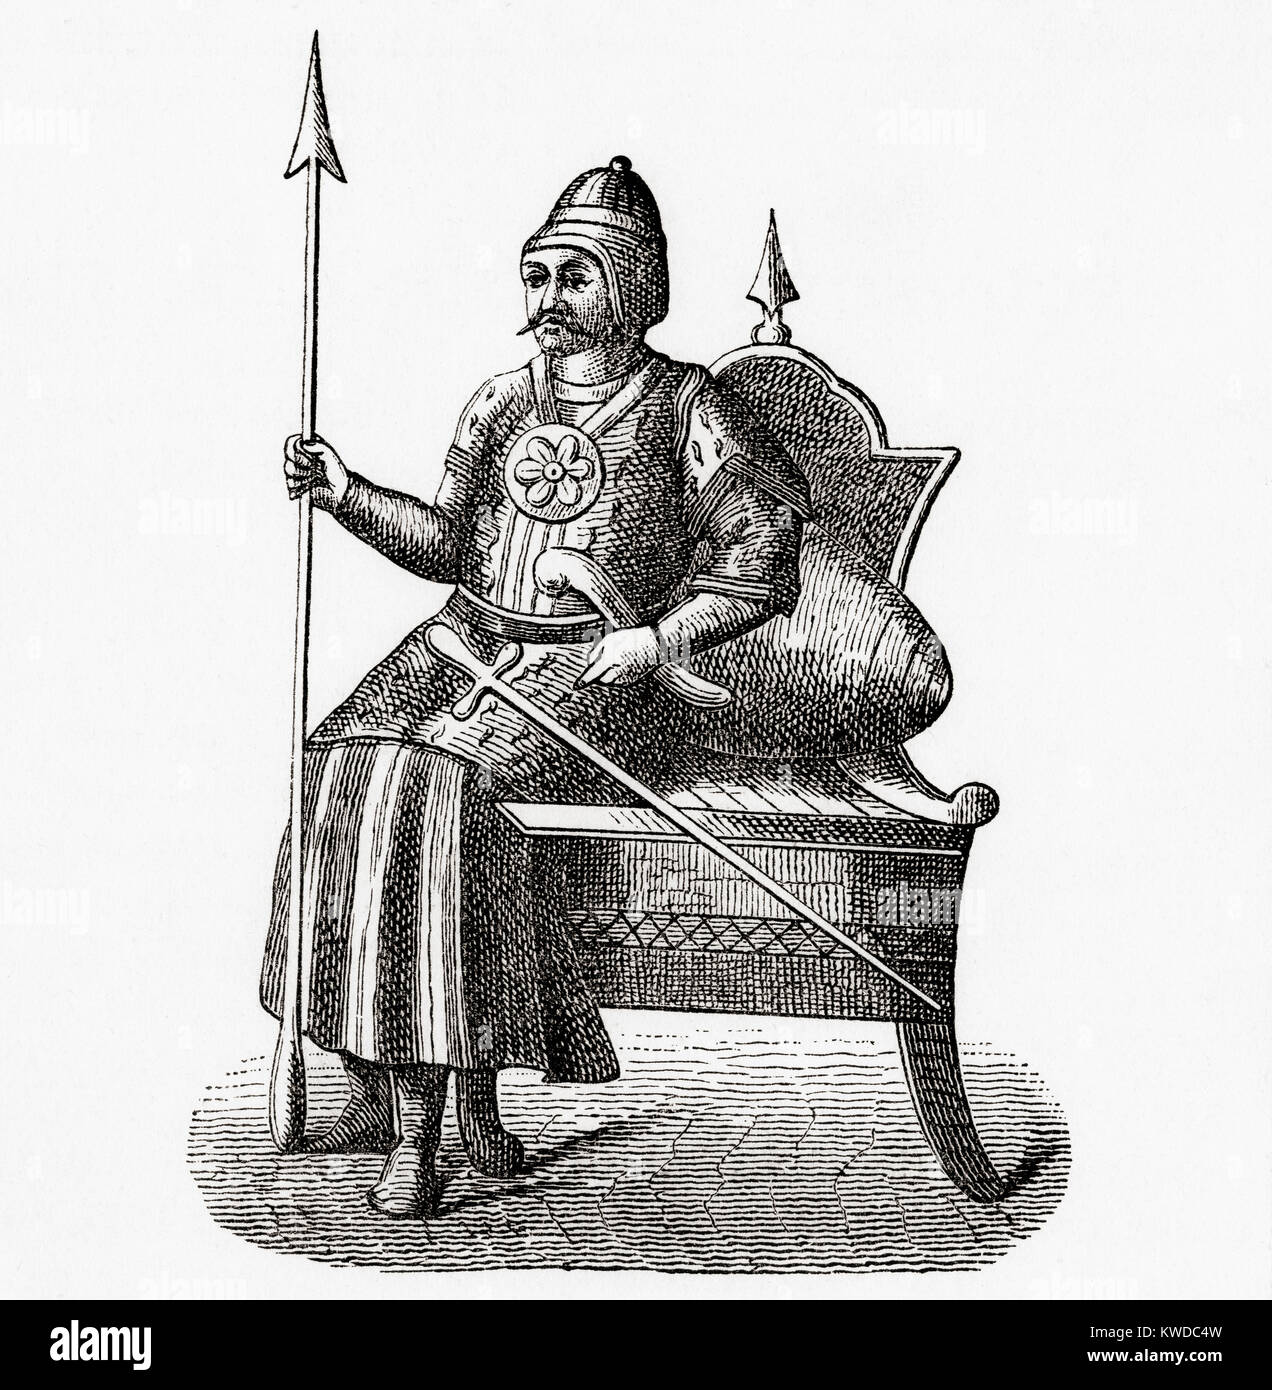 Timur, 1336 – 1405, aka Amir Timur or Tamerlane.  Turco-Mongol conqueror. As the founder of the Timurid Empire in Persia and Central Asia he became the first ruler in the Timurid dynasty.  From Ward and Lock's Illustrated History of the World, published c.1882. Stock Photo